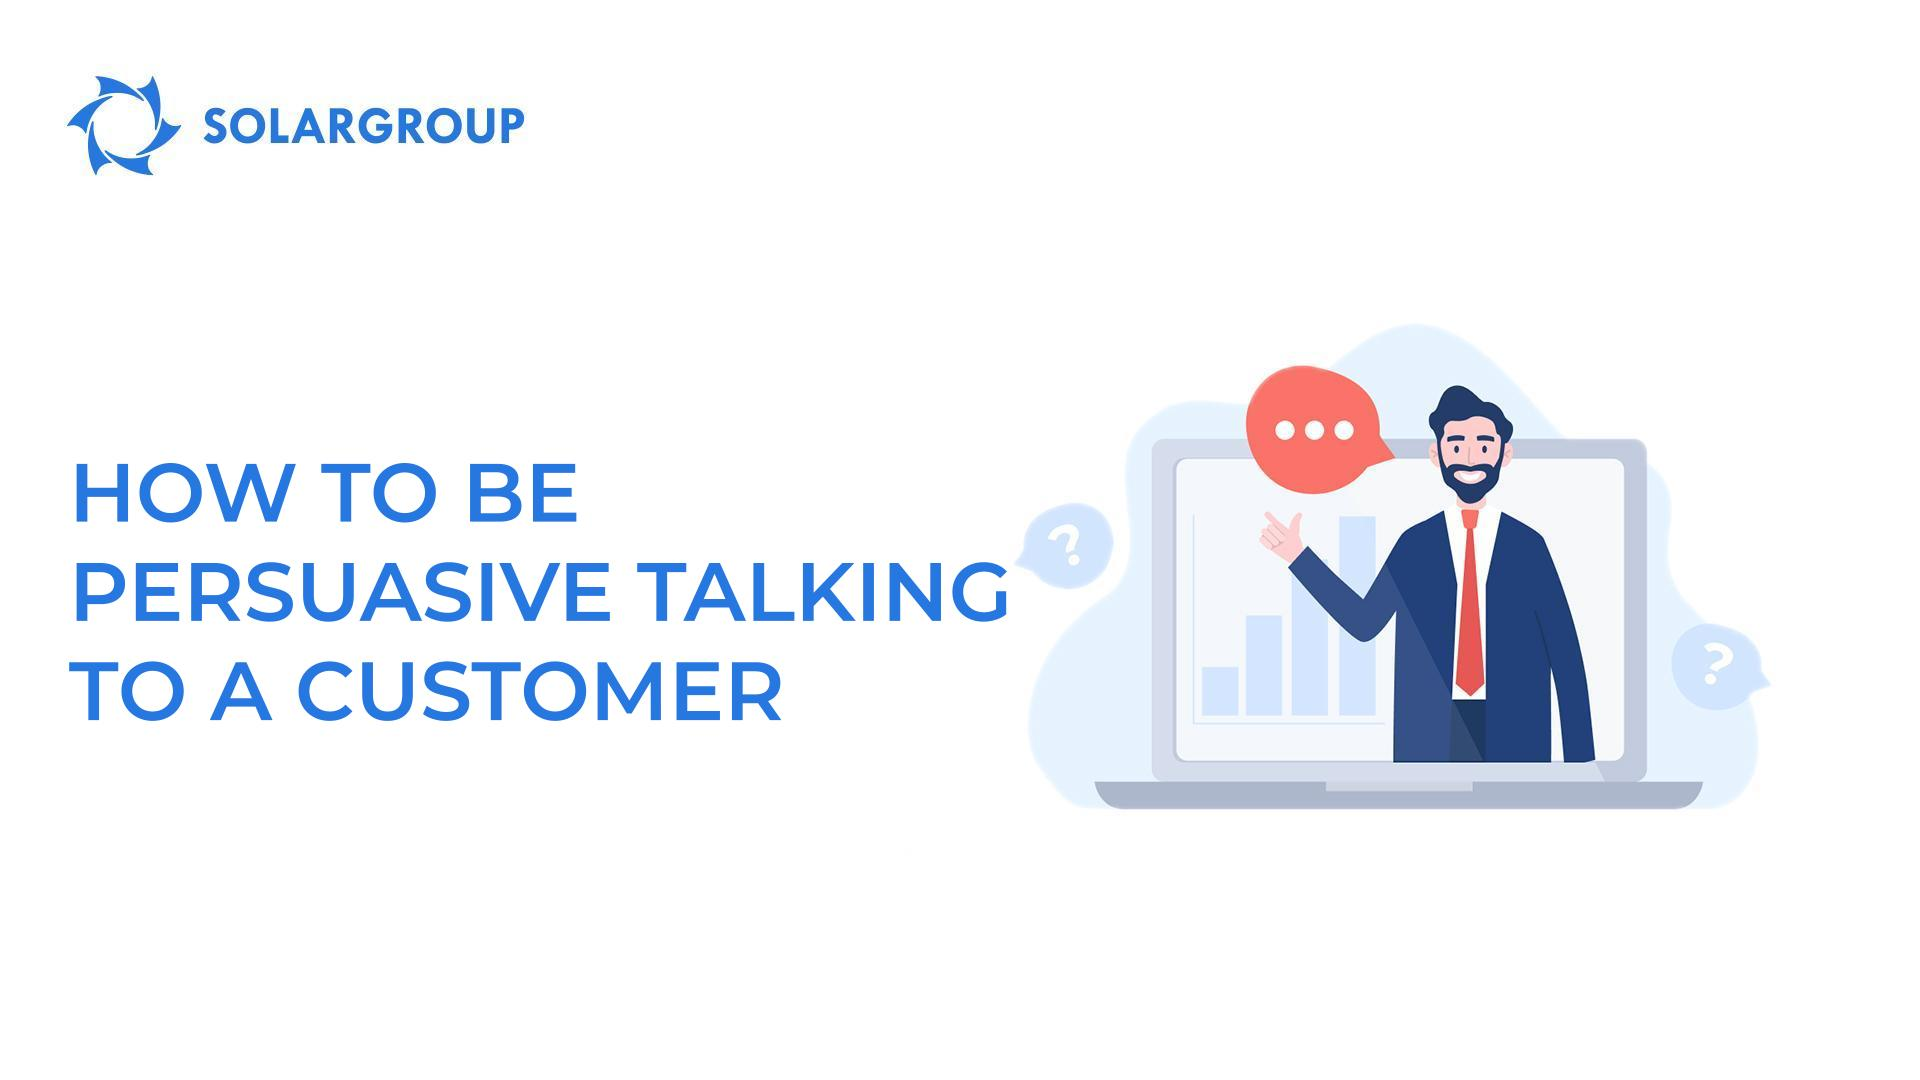 How to be persuasive talking to a customer